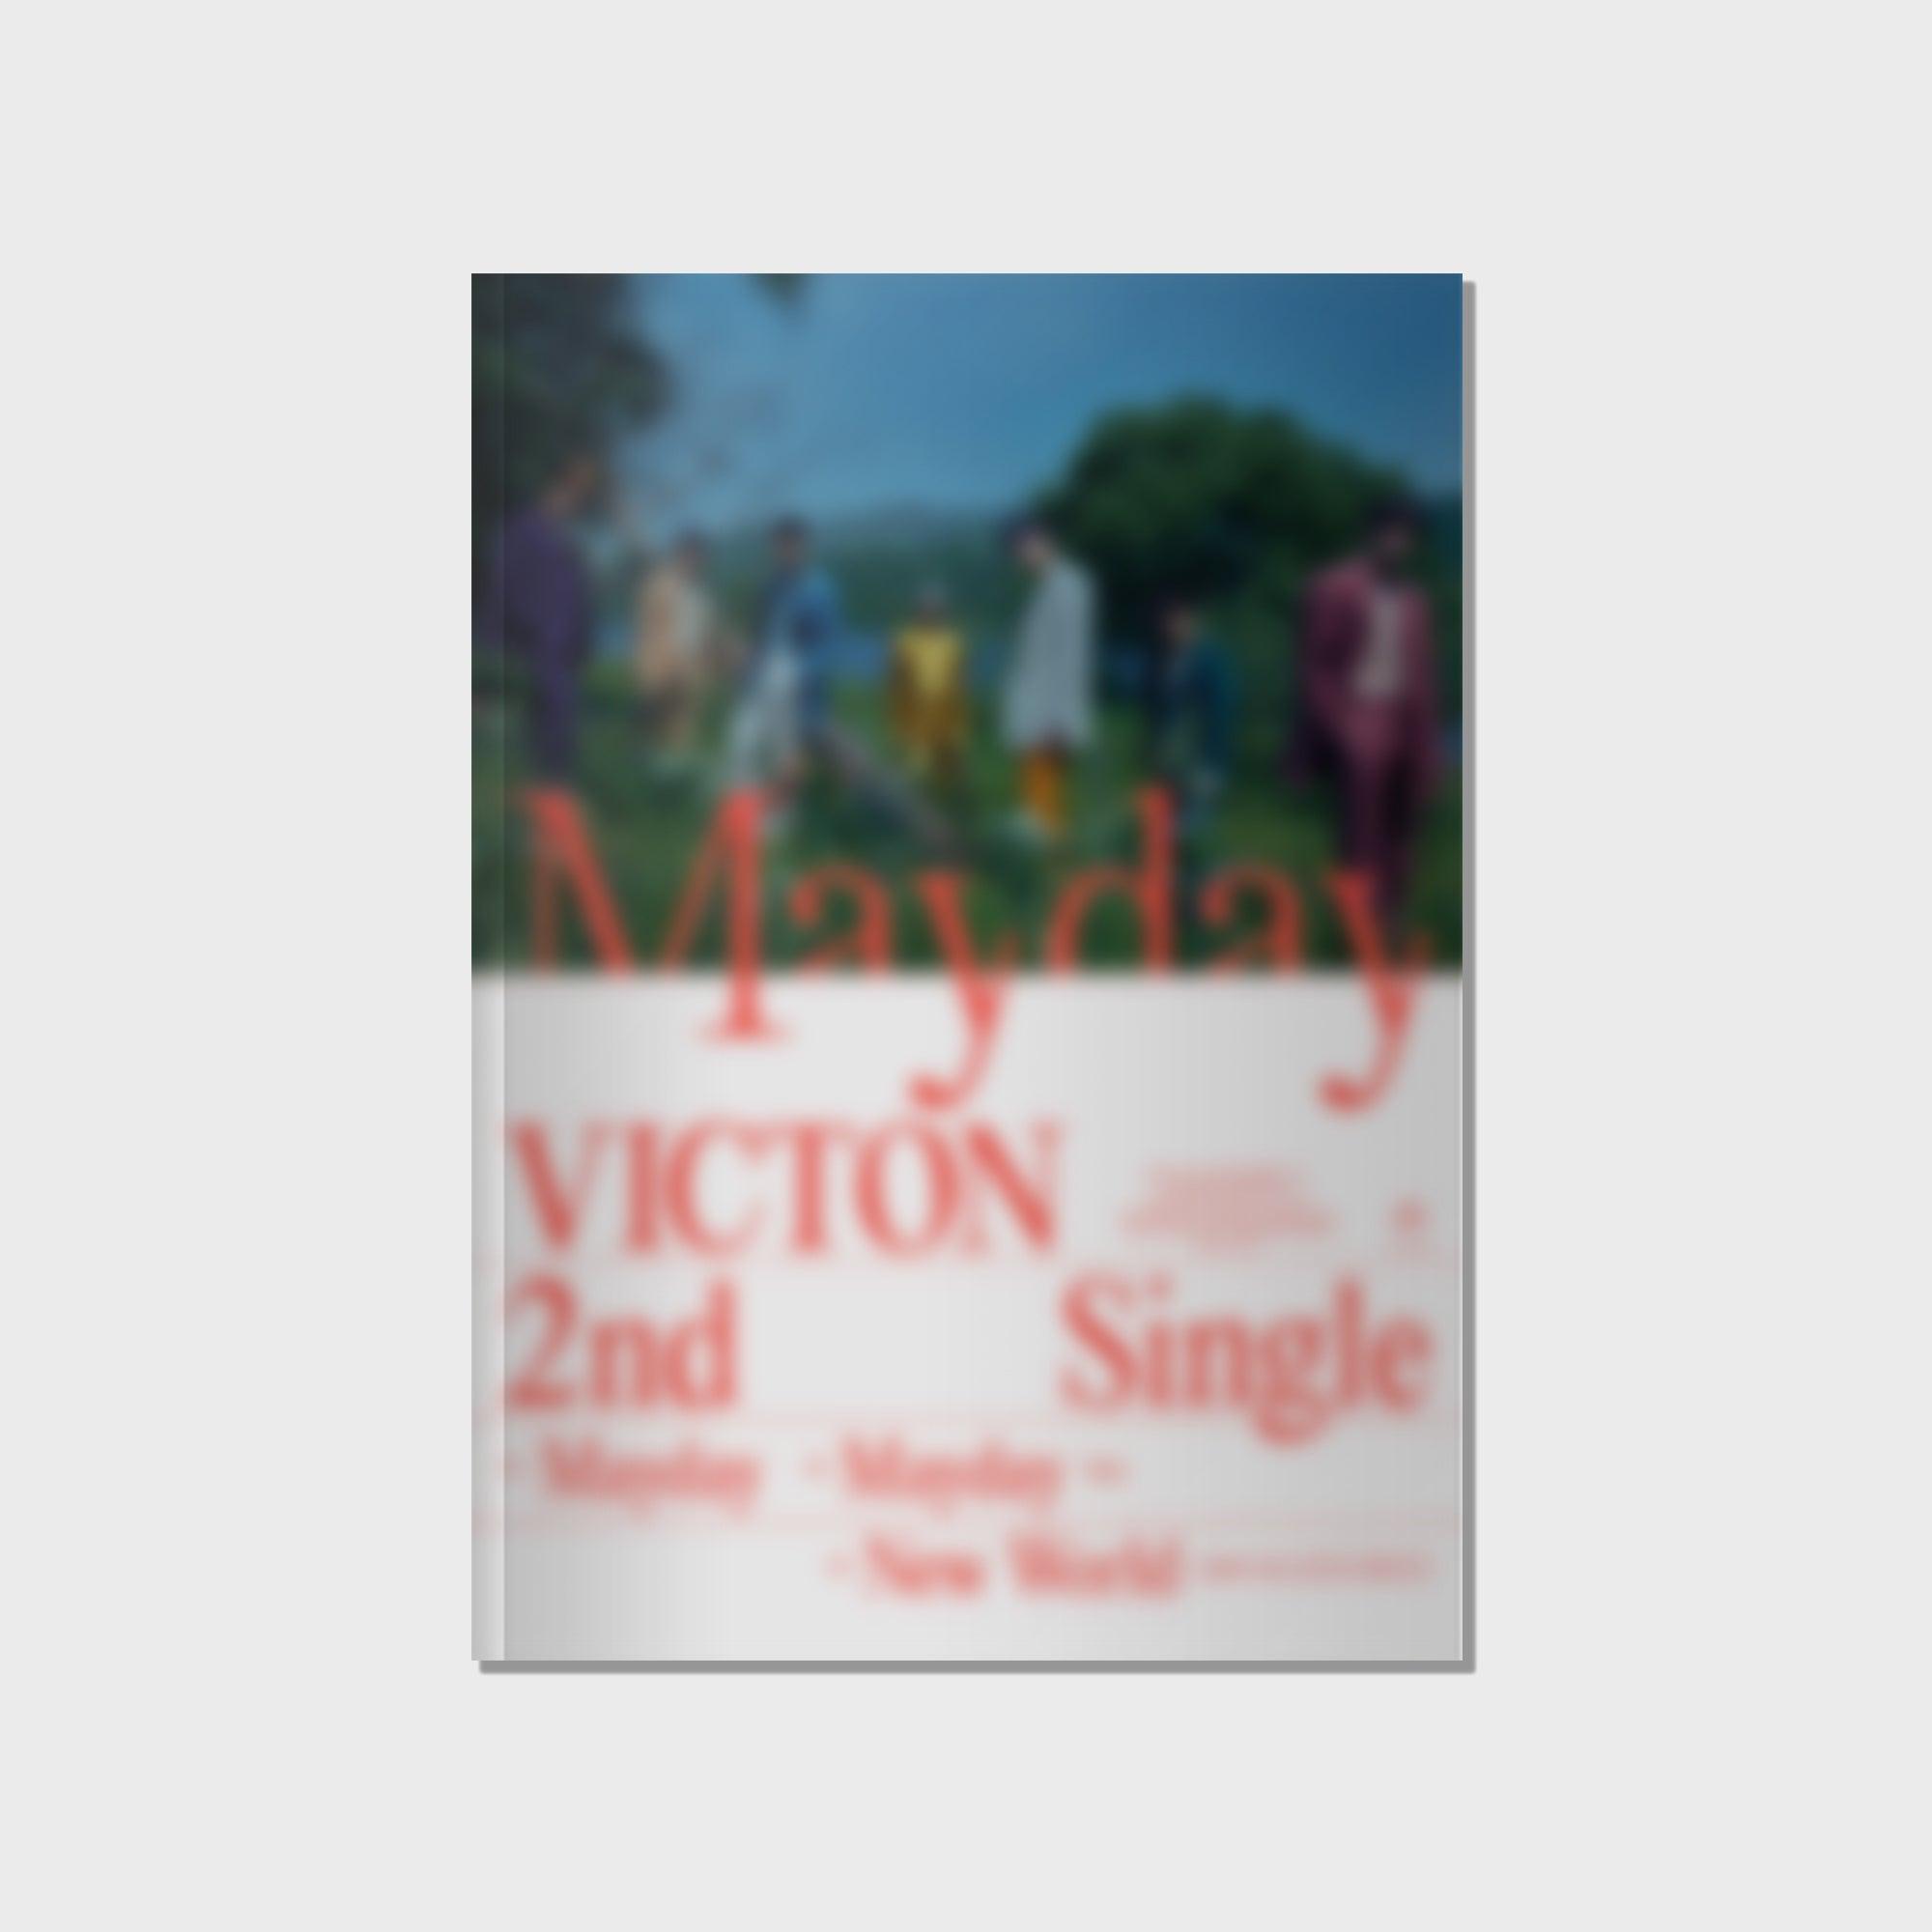 VICTON 2ND SINGLE ALBUM 'MAYDAY' + POSTER